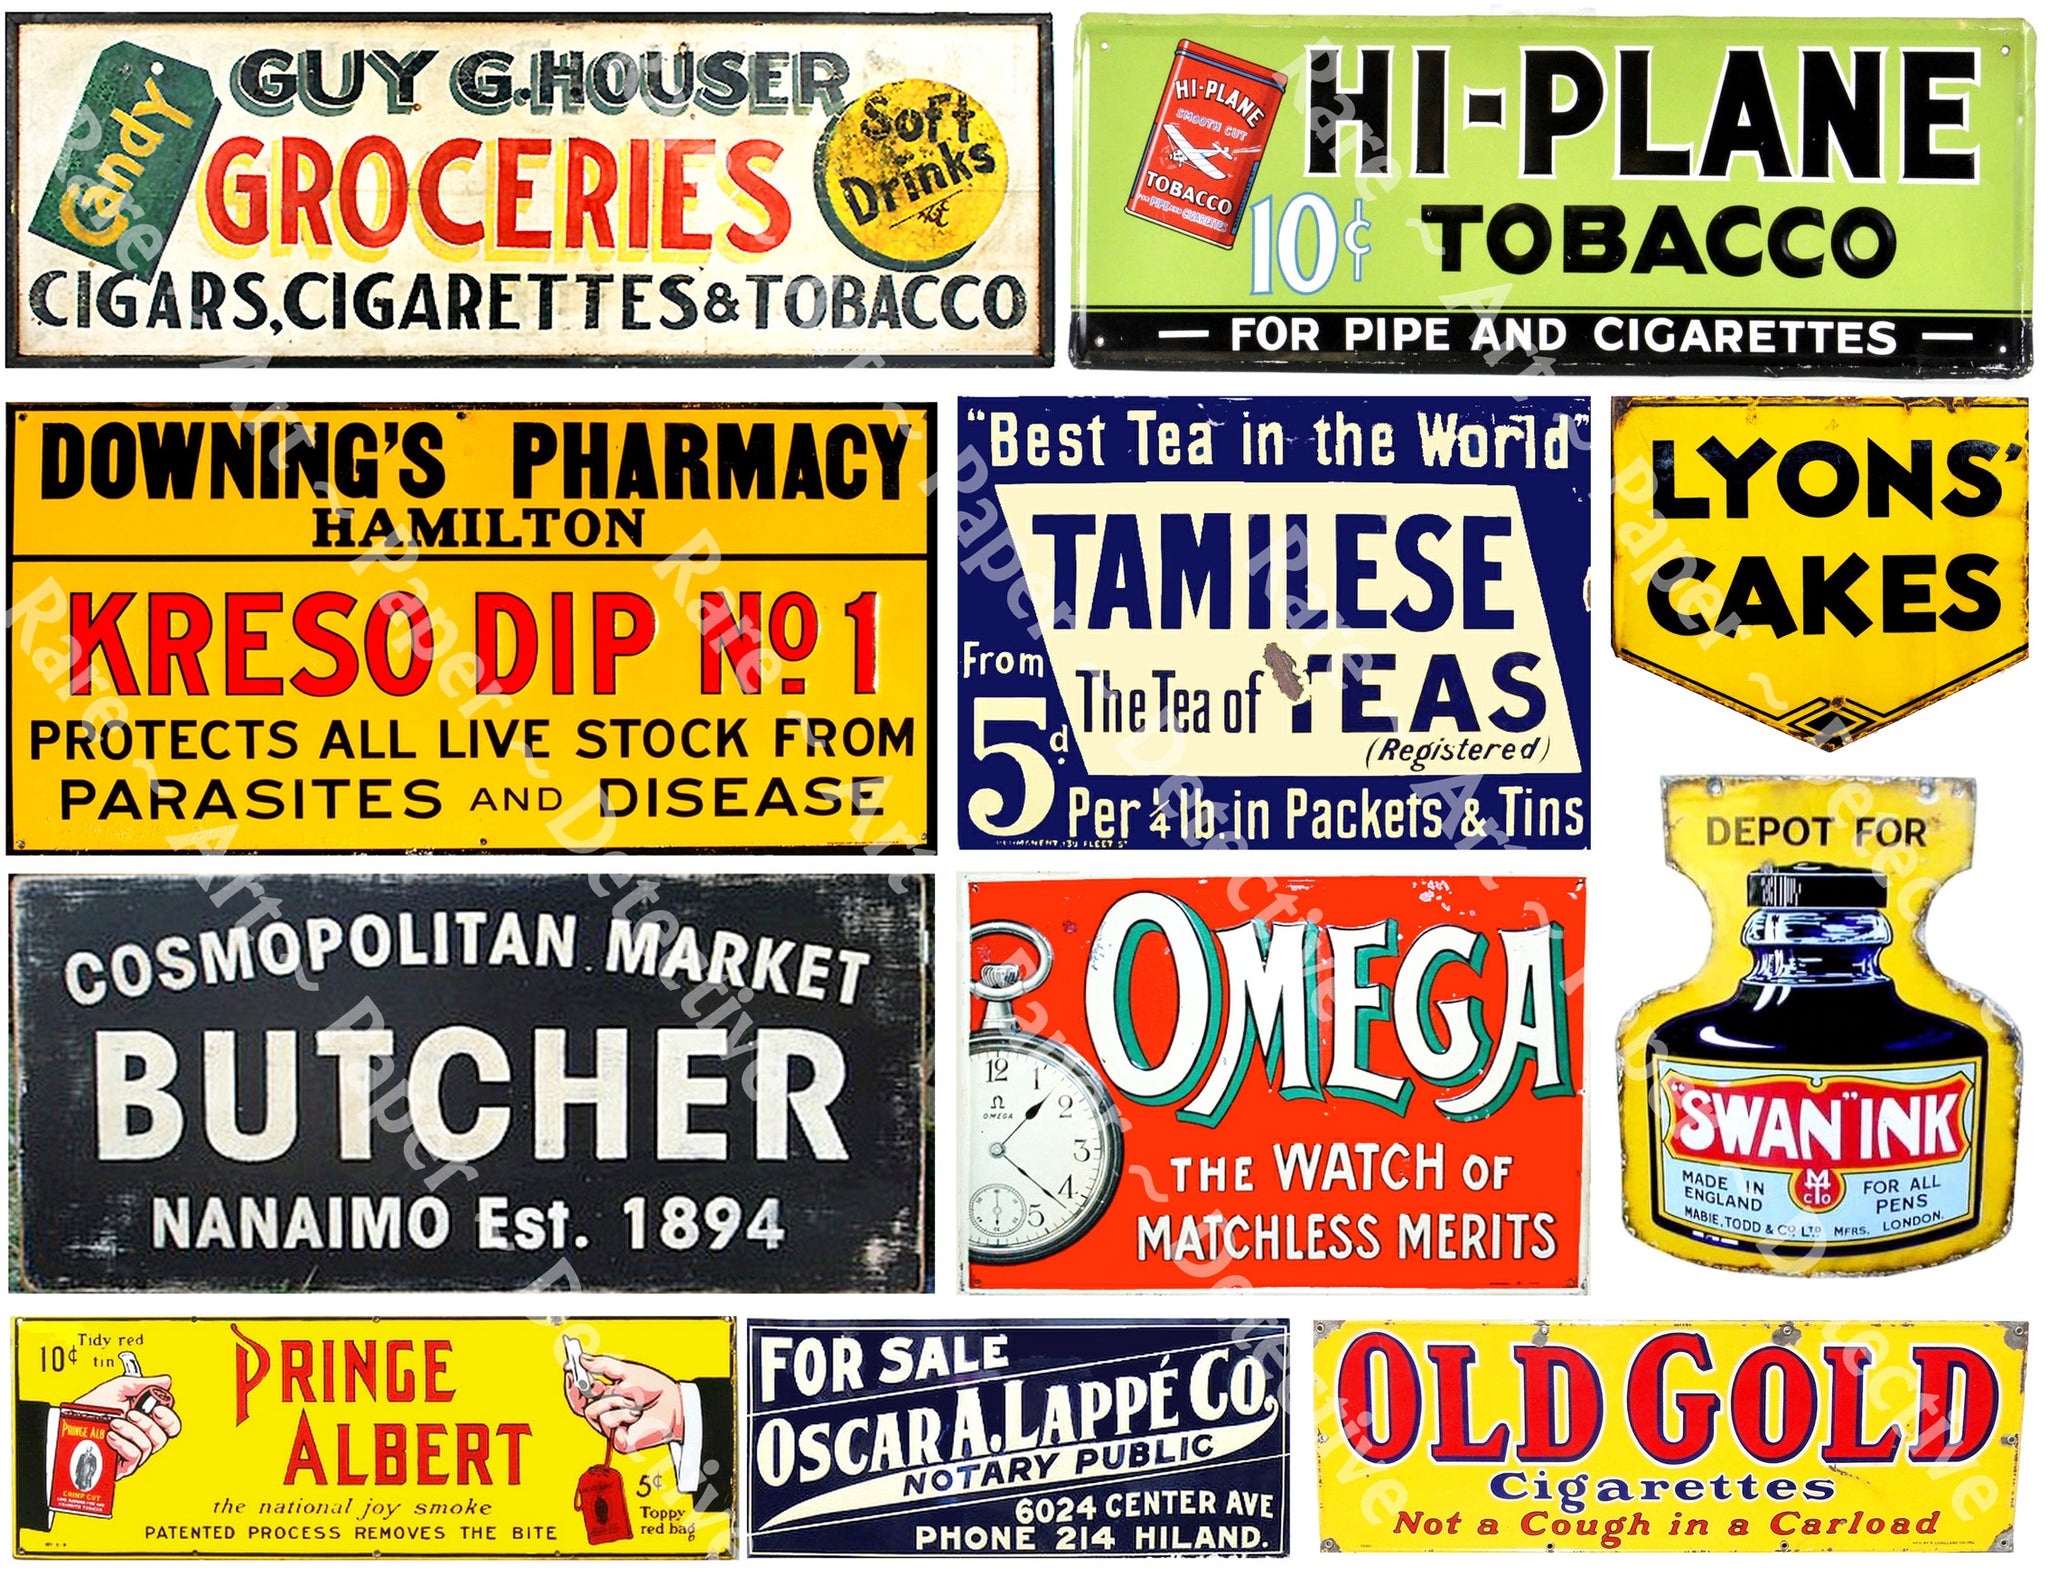 Vintage Advertising, General Store Sign Stickers Featuring a Vintage Rusty Look, Sheet #456